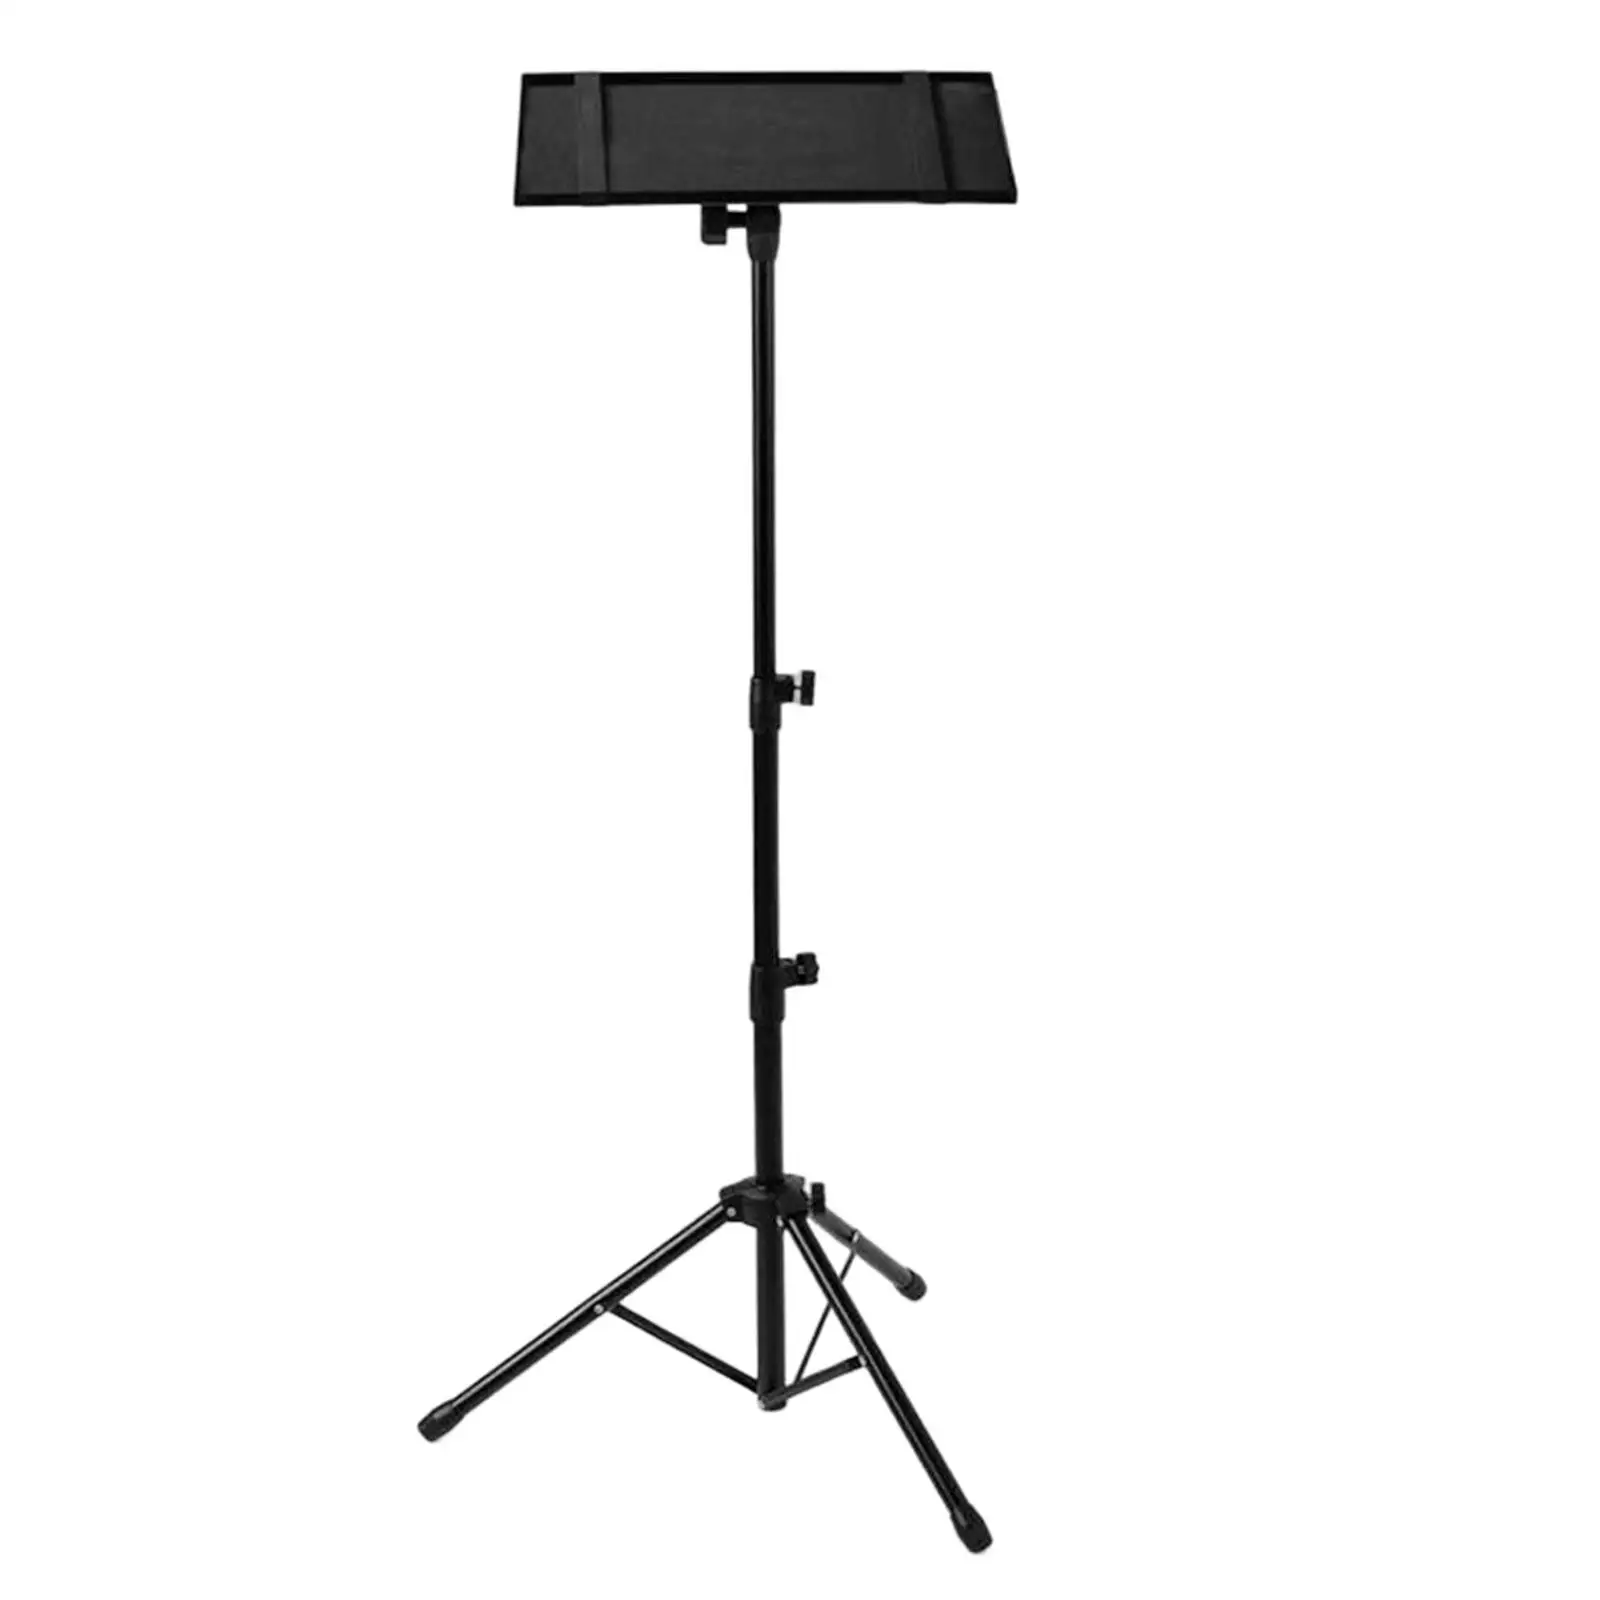 Multipurpose Projector Tripod Stand Photography Telescopic Adjustable Height Projector Bracket for Bedroom Laptop Computer Home